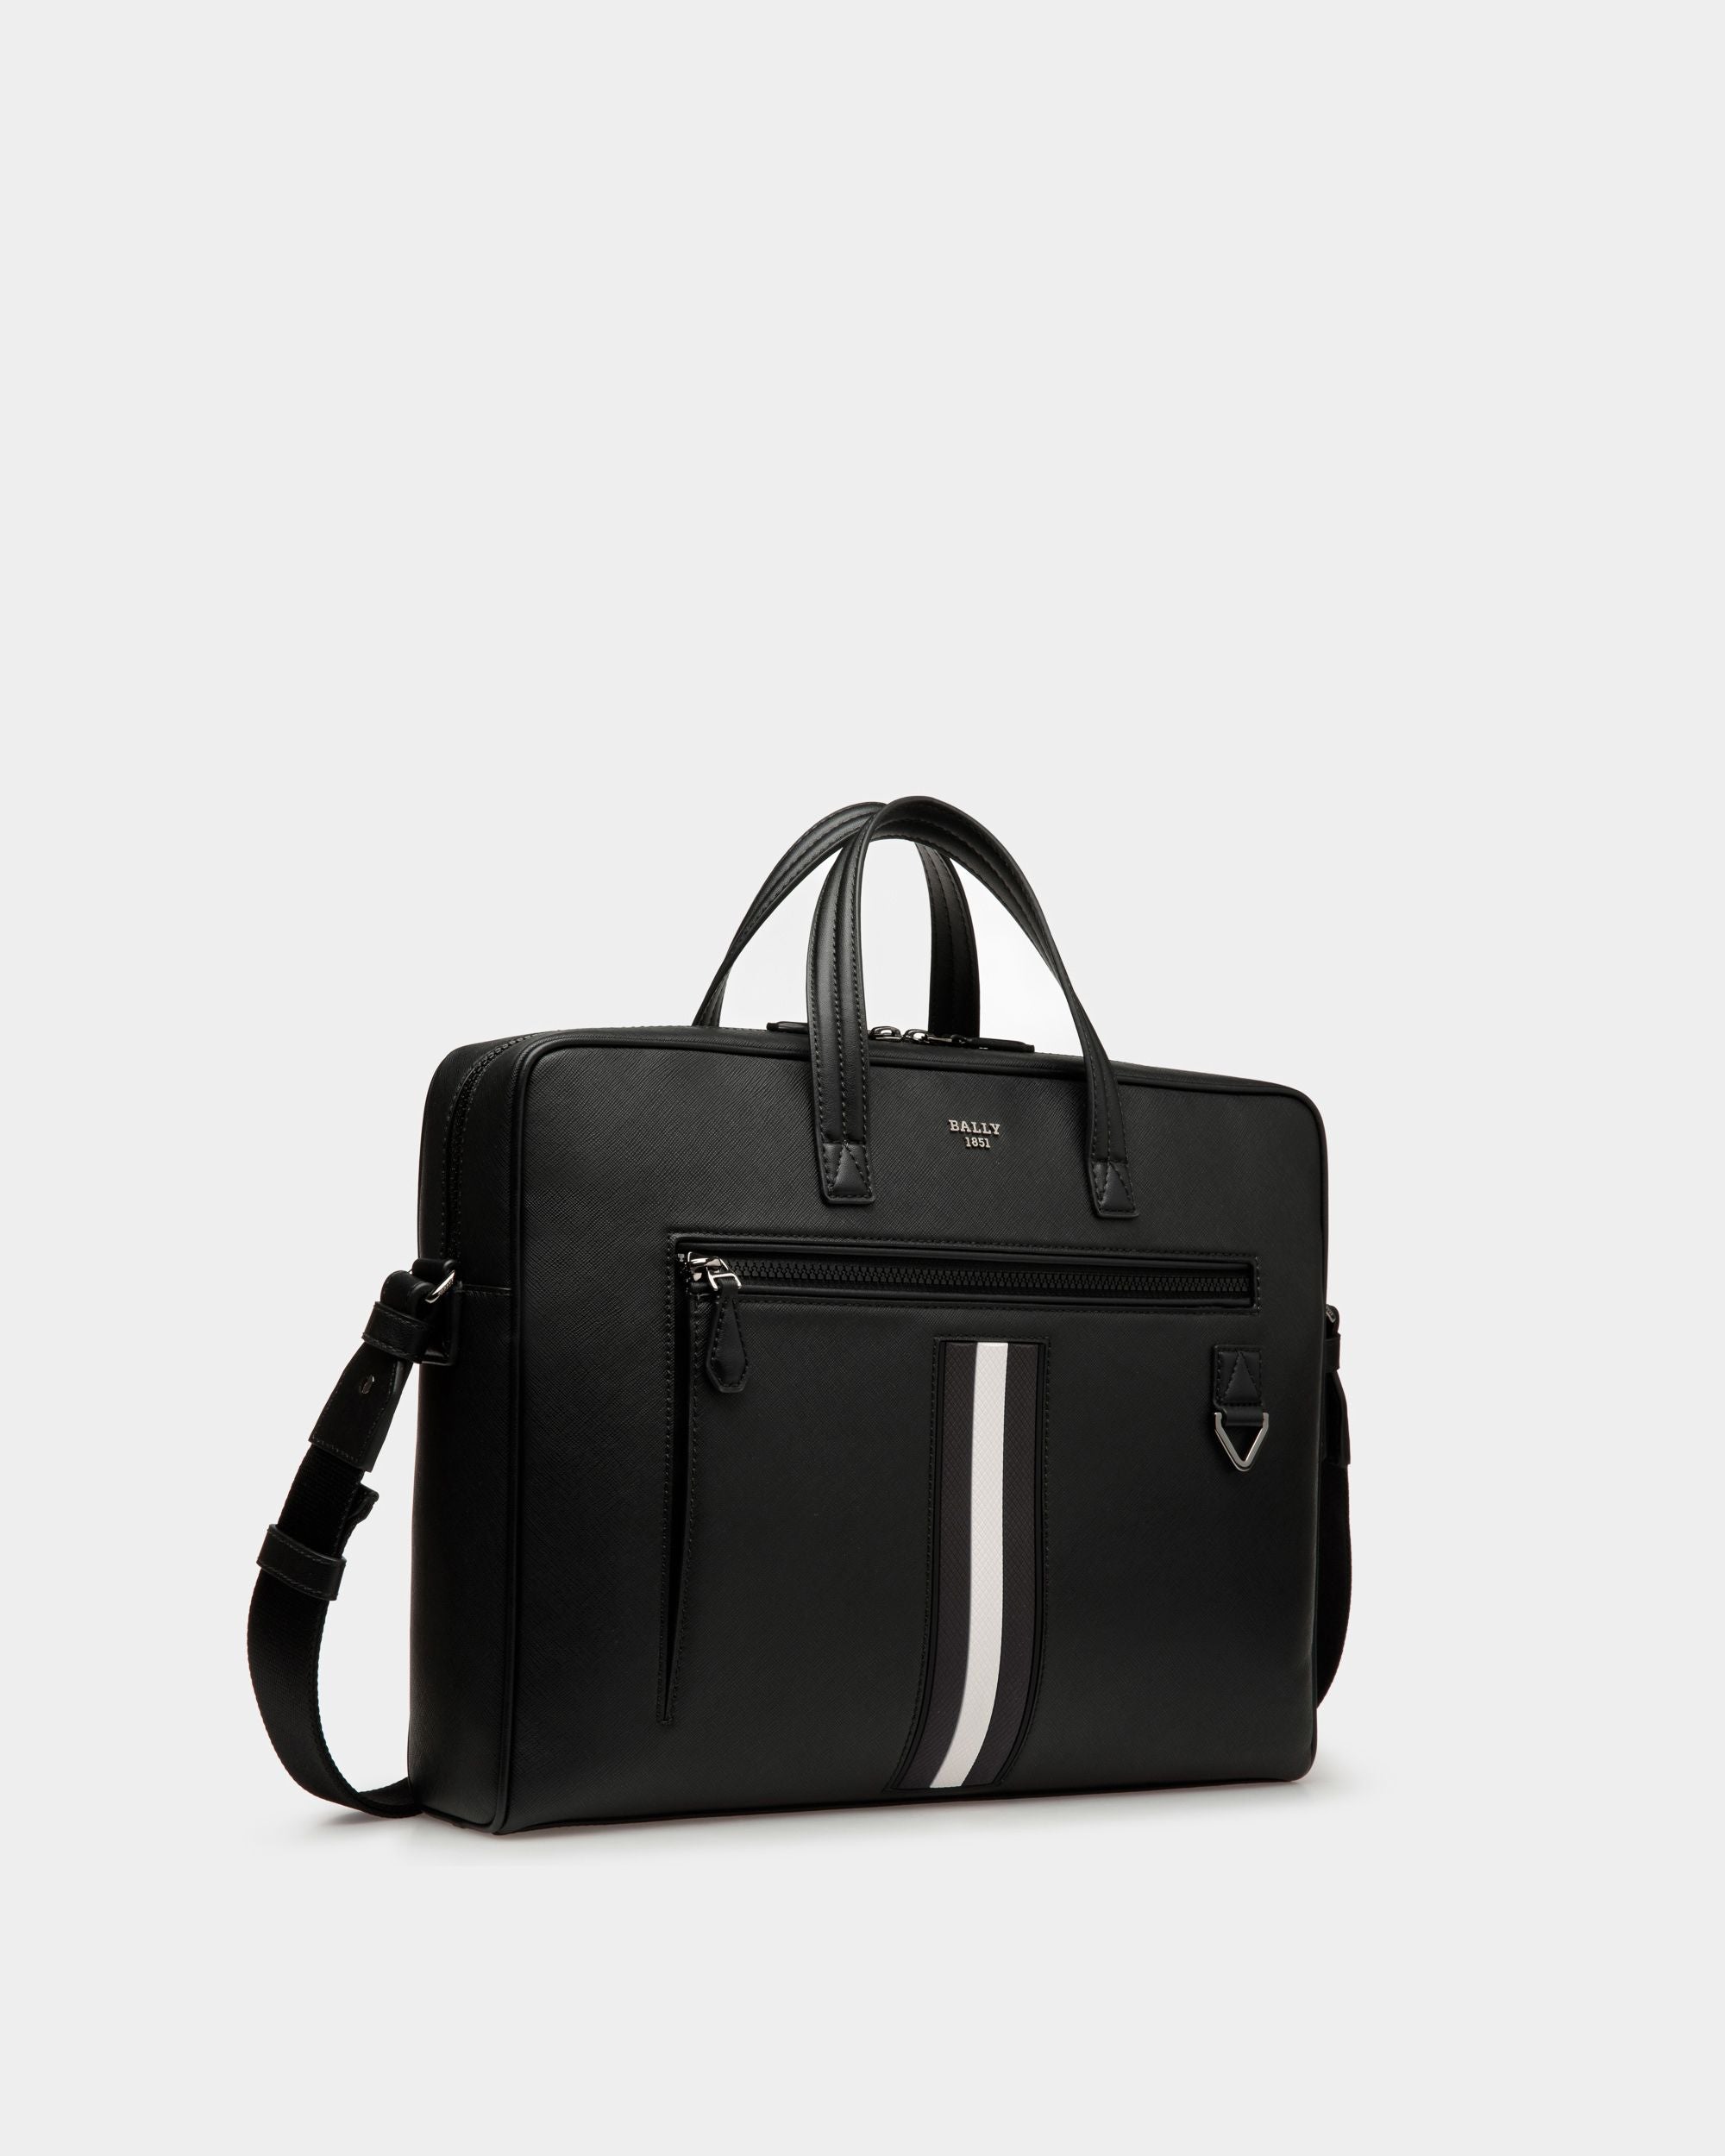 Mikes | Men's Business Bag | Black Leather | Bally | Still Life 3/4 Front